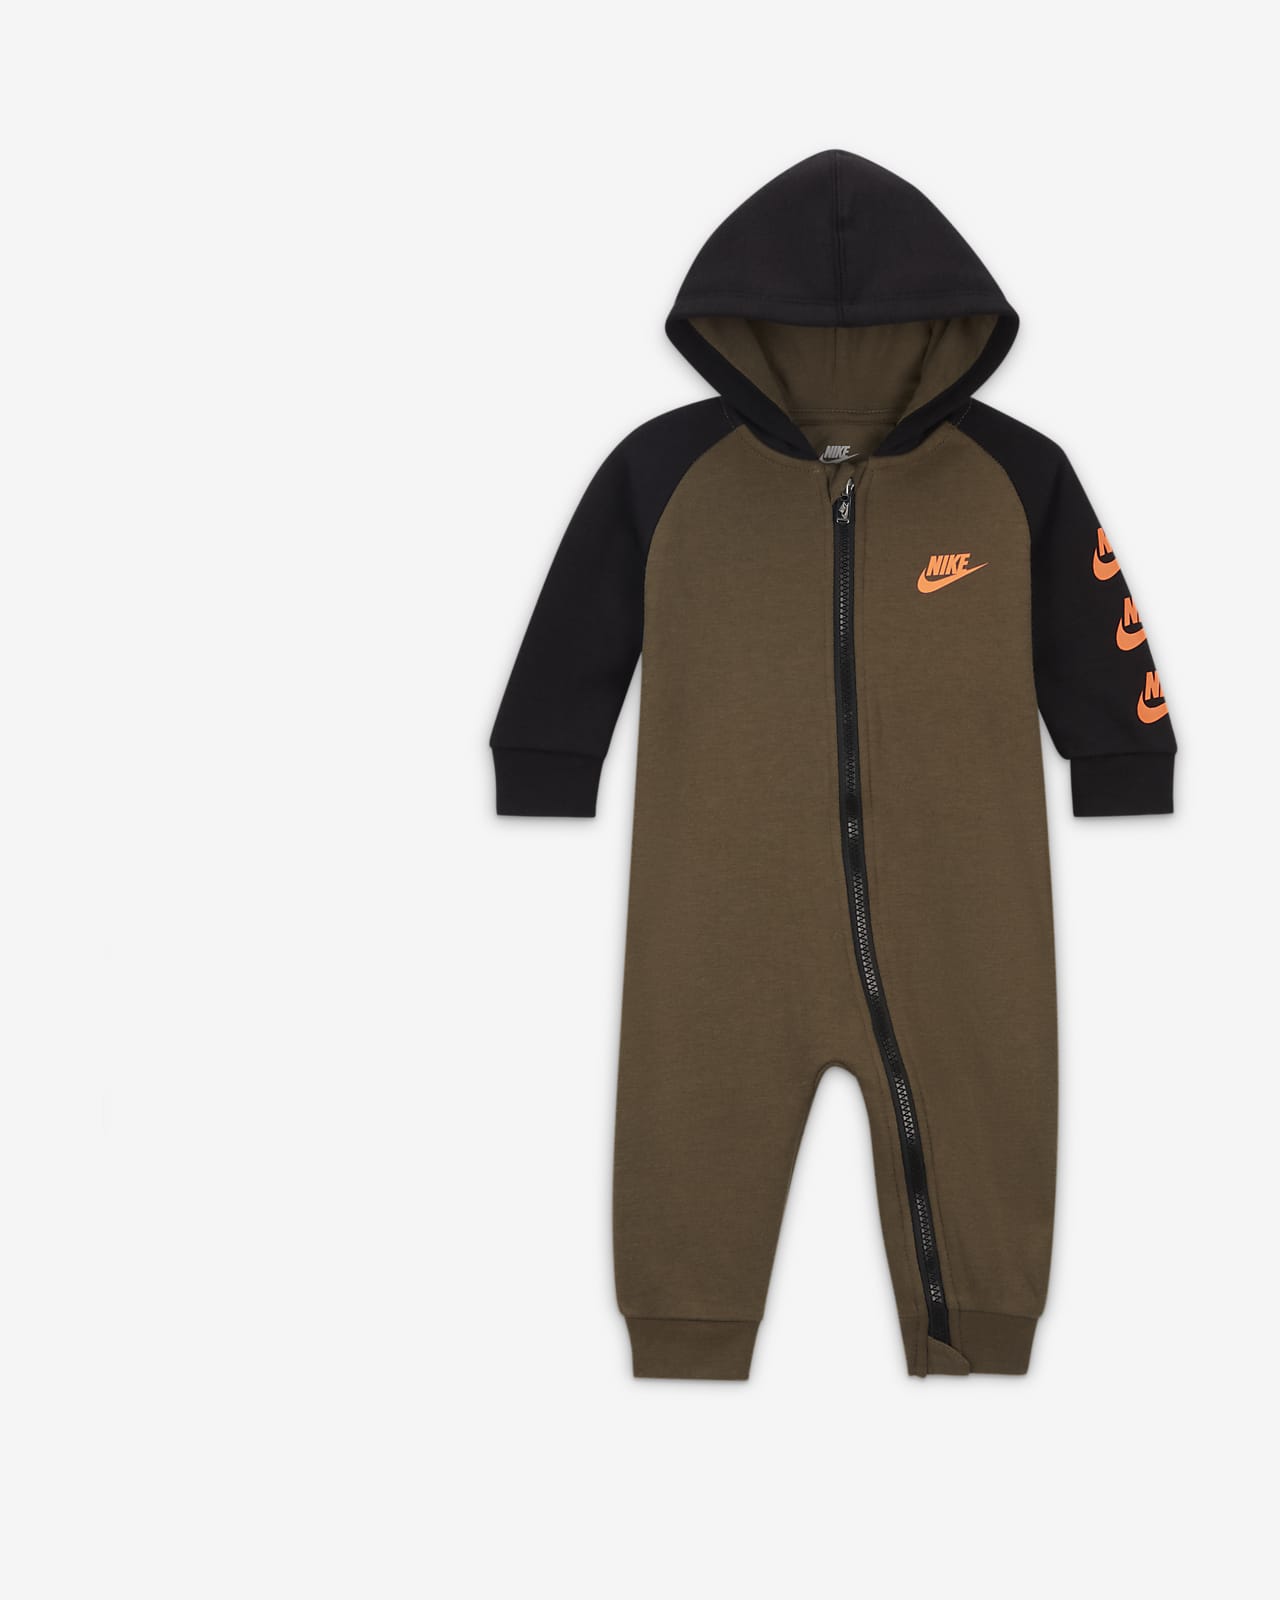 Baby (0-9M) Hooded Nike Sportswear Coverall.